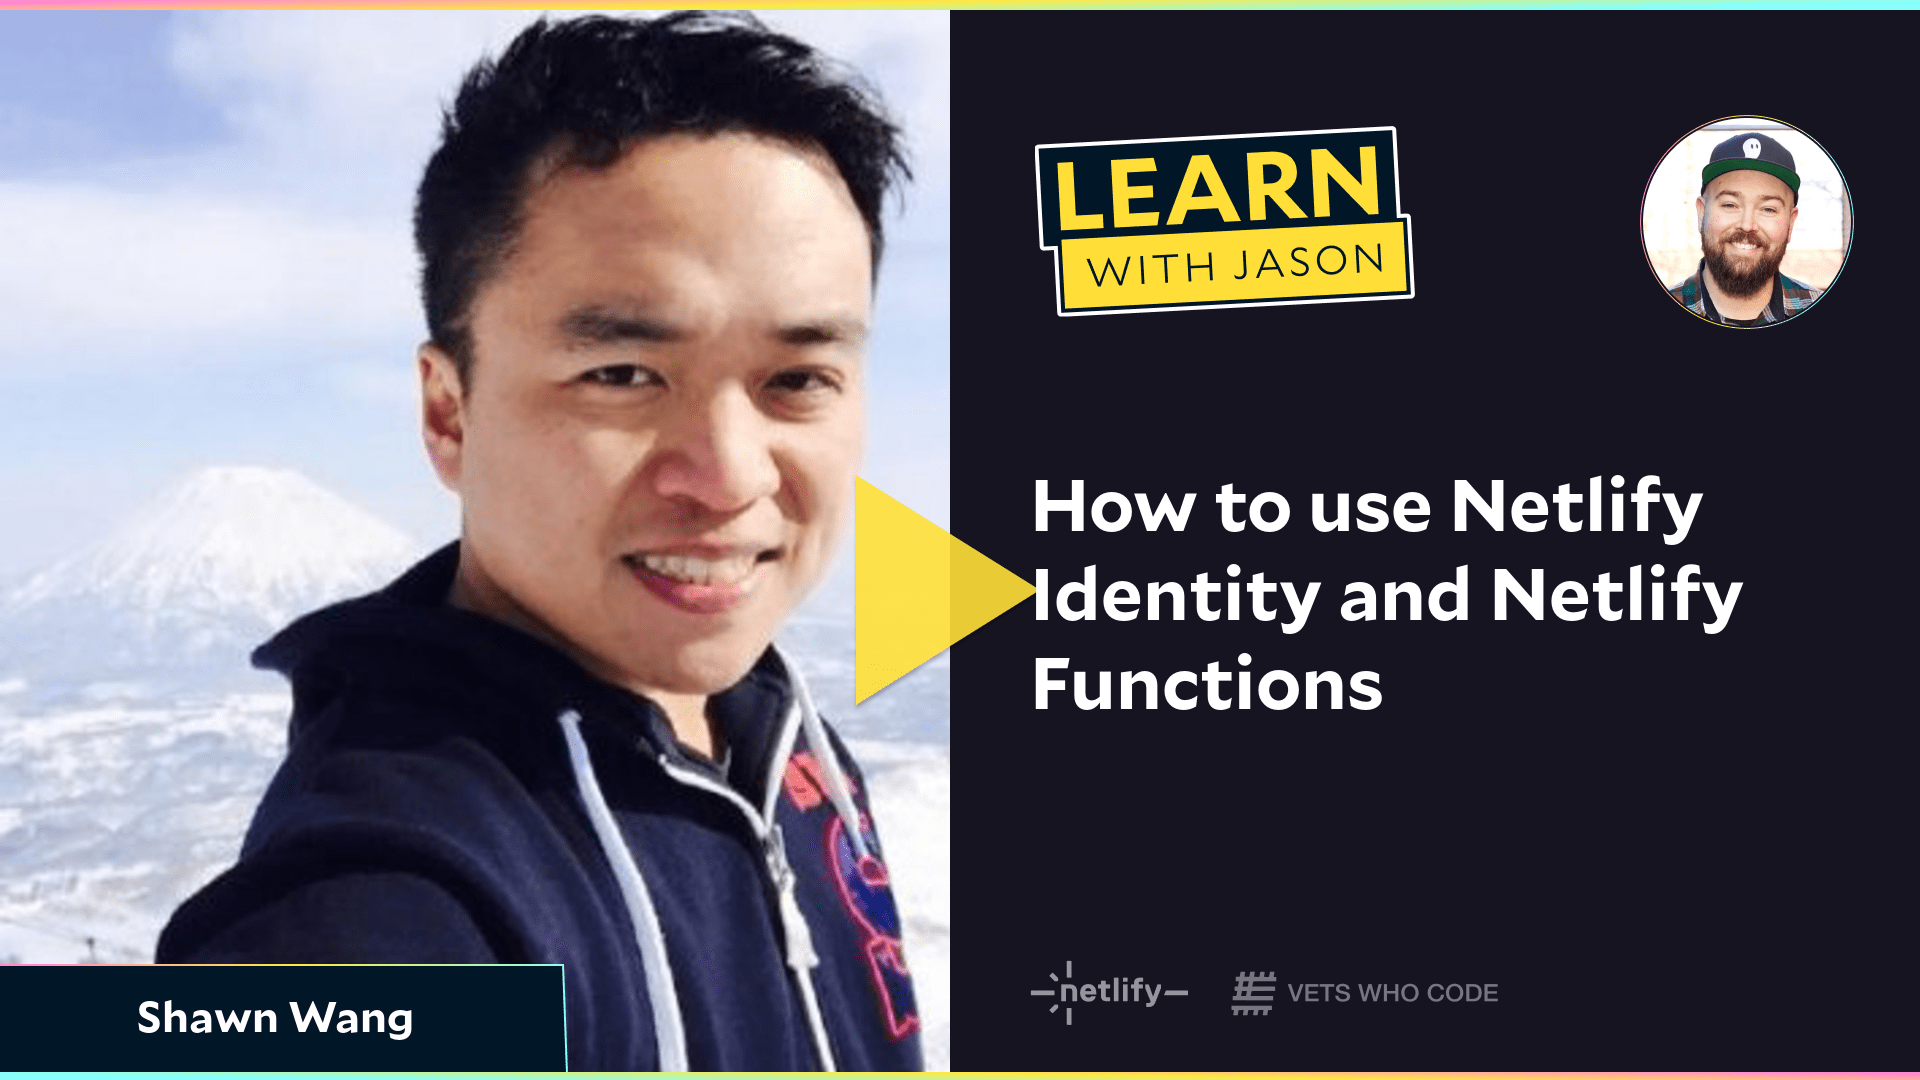 How to use Netlify Identity and Netlify Functions (with Shawn Wang)